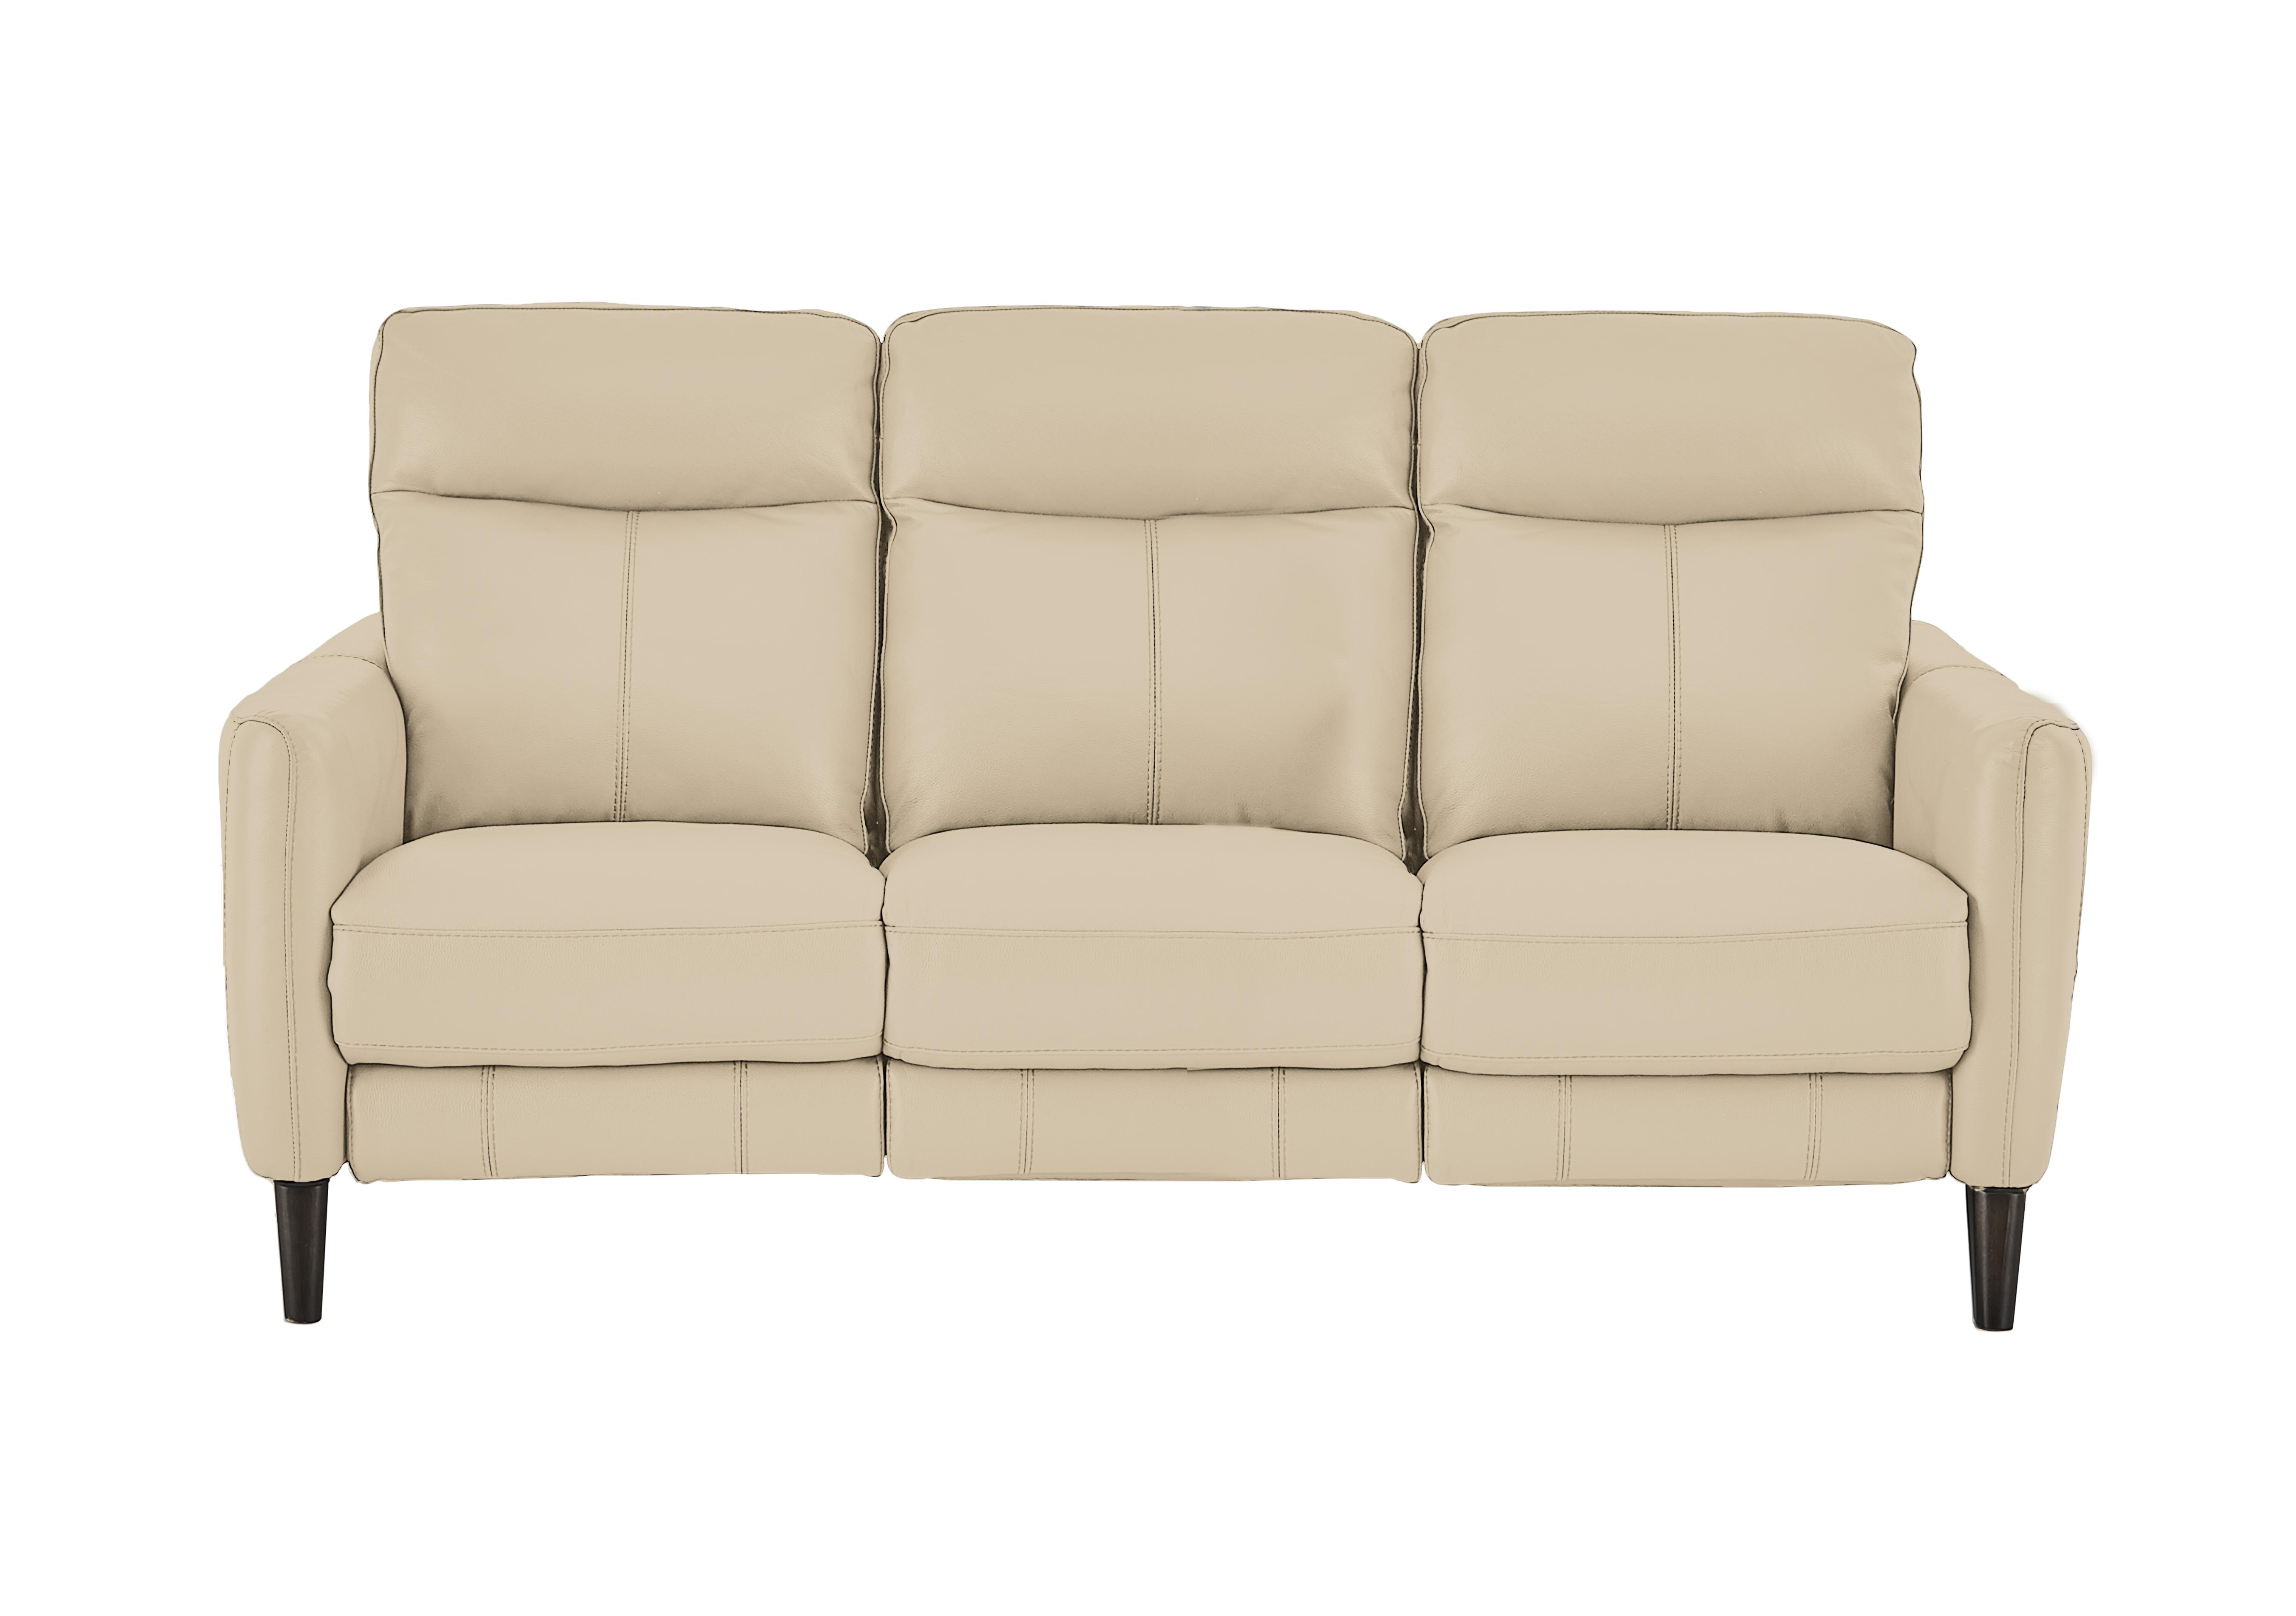 Compact Collection Petit 3 Seater Leather Sofa in Bv-862c Bisque on Furniture Village